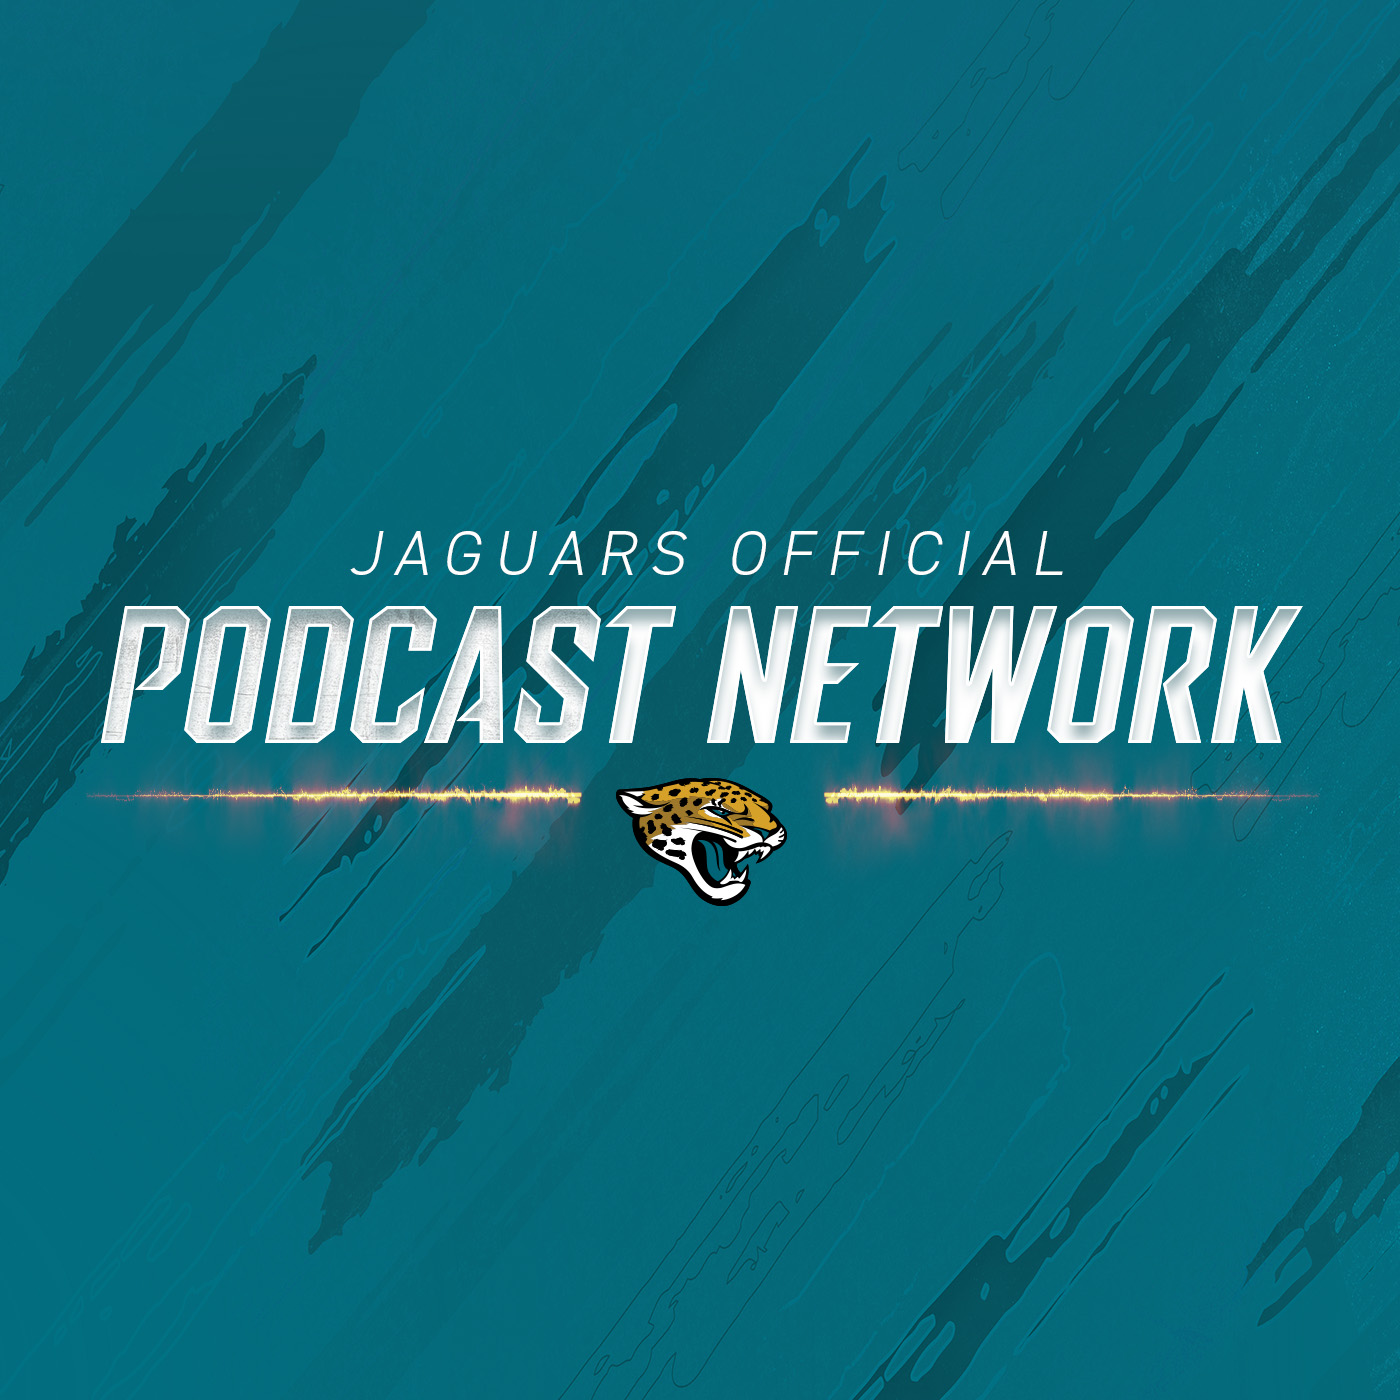 Jags Drive Time: Wednesday, November 17